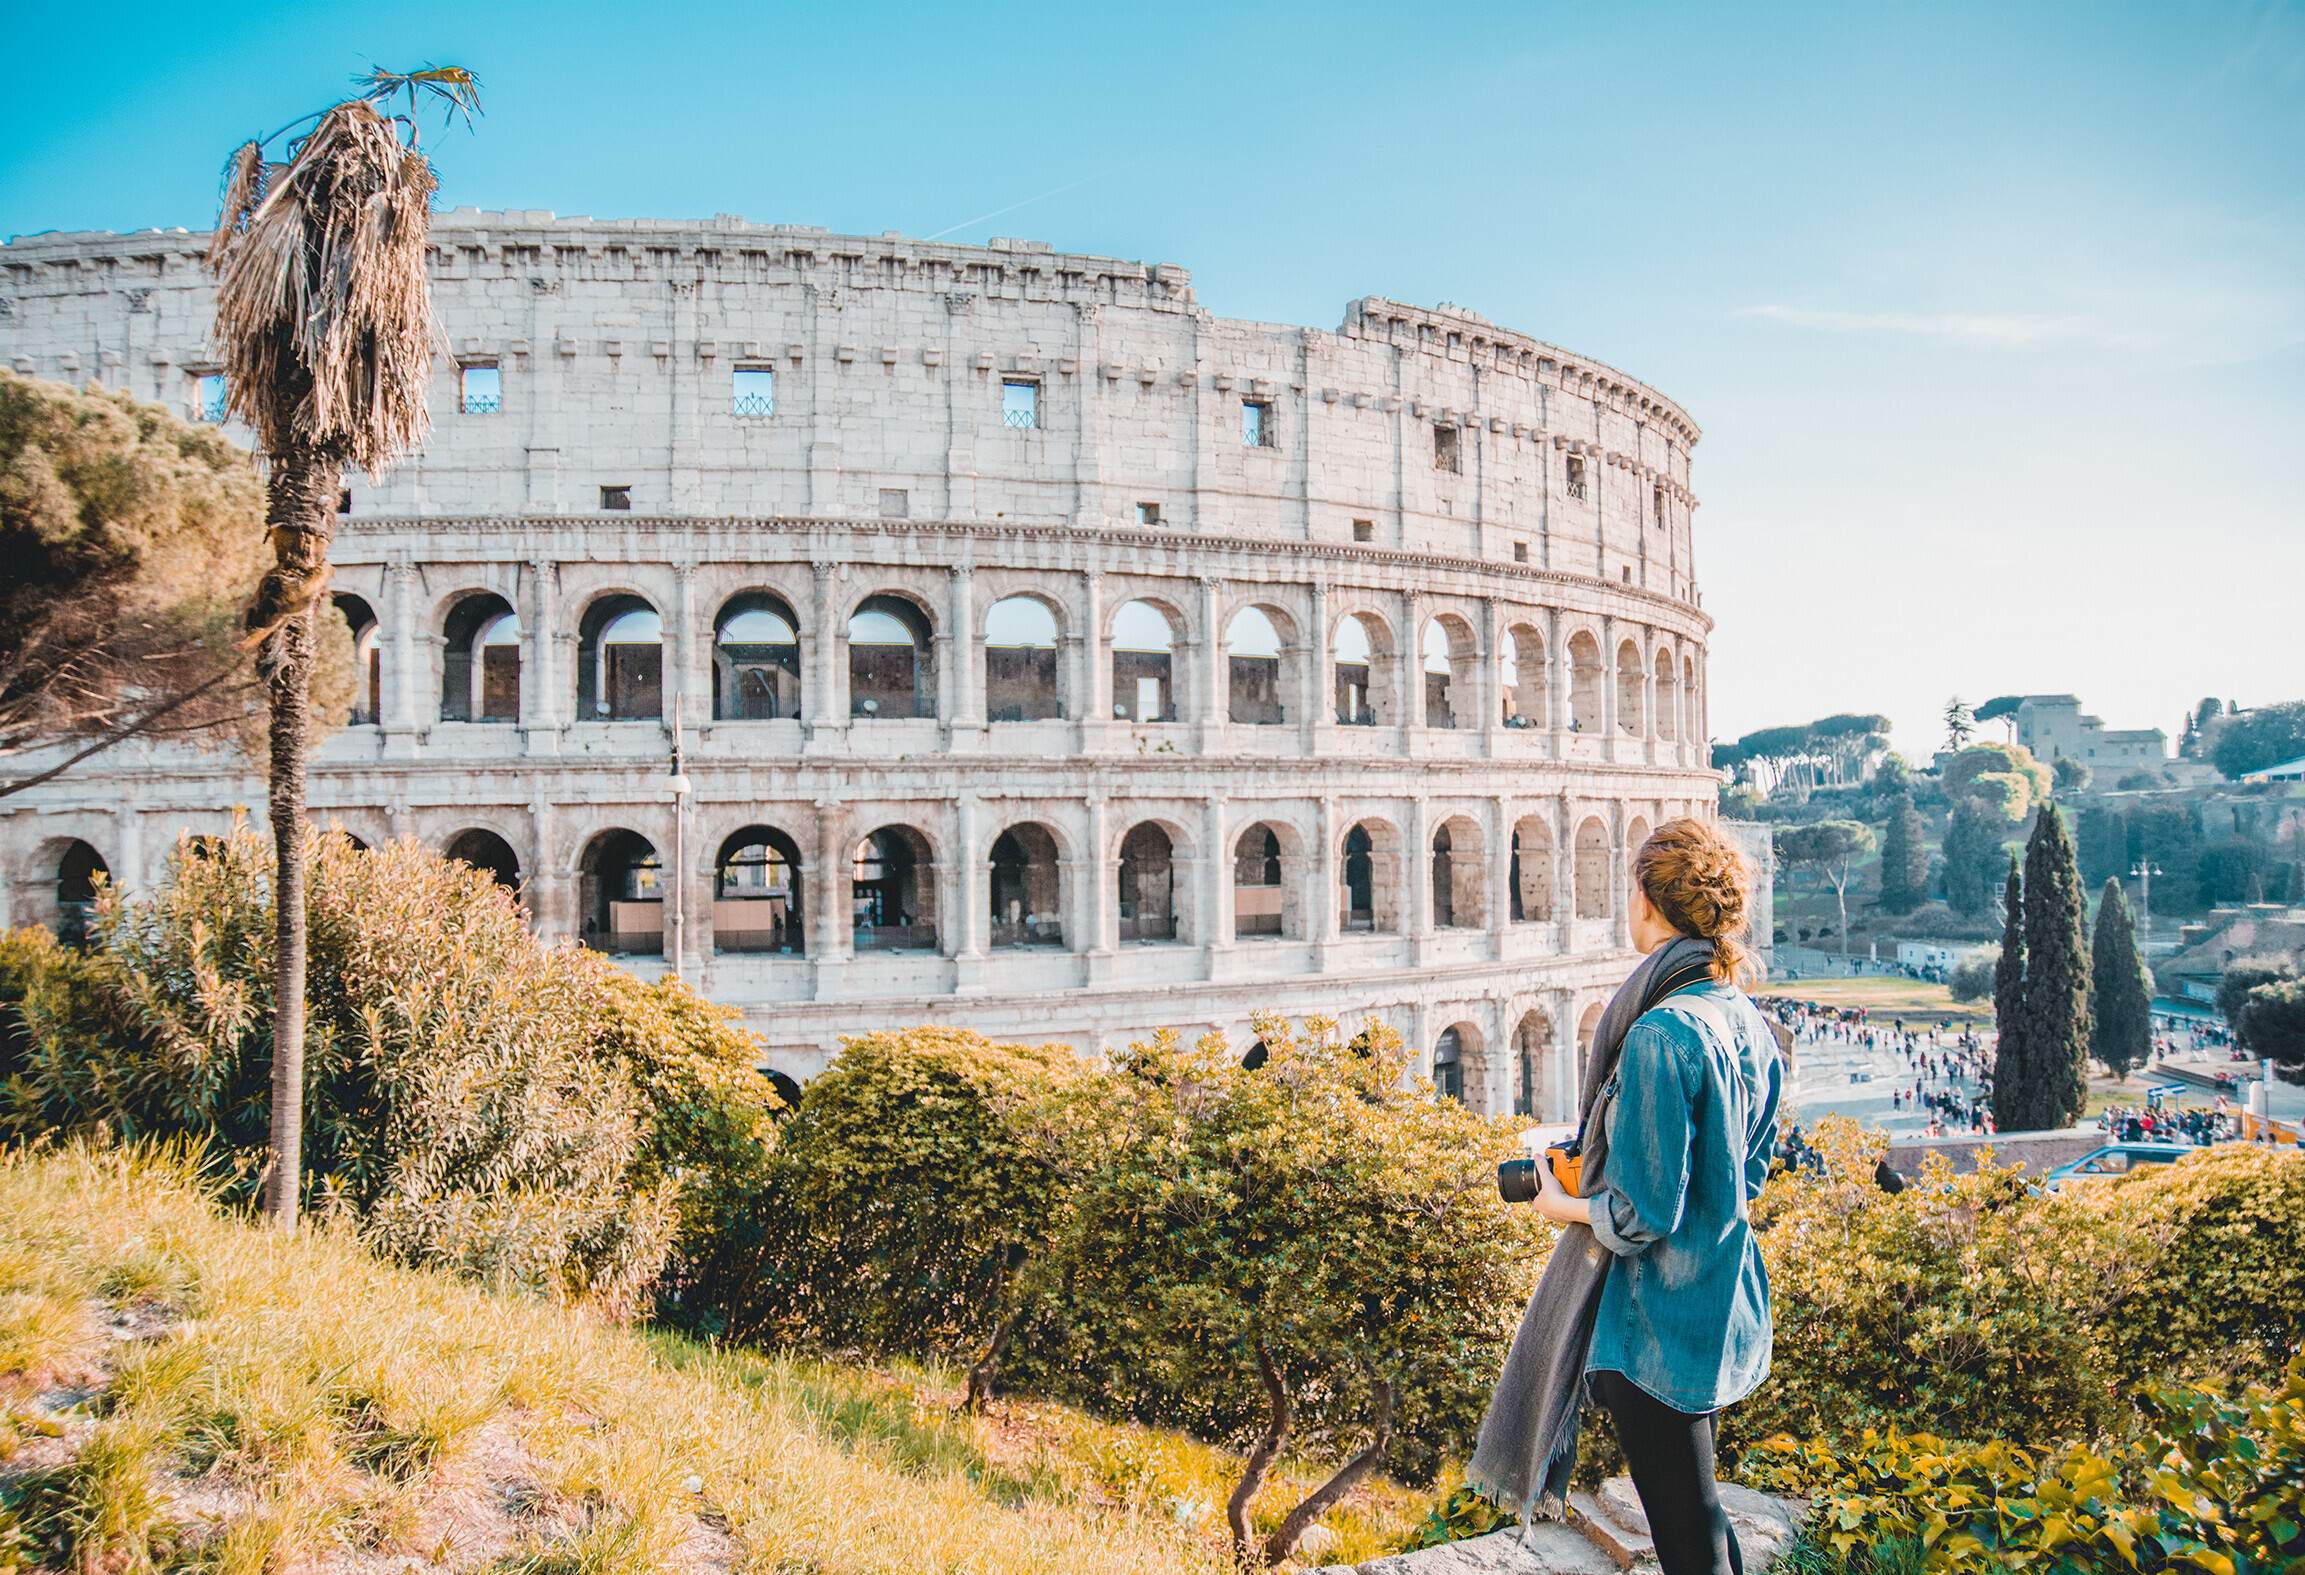 A female tourist with a camera admiring the beauty of the Colosseum from a hill.